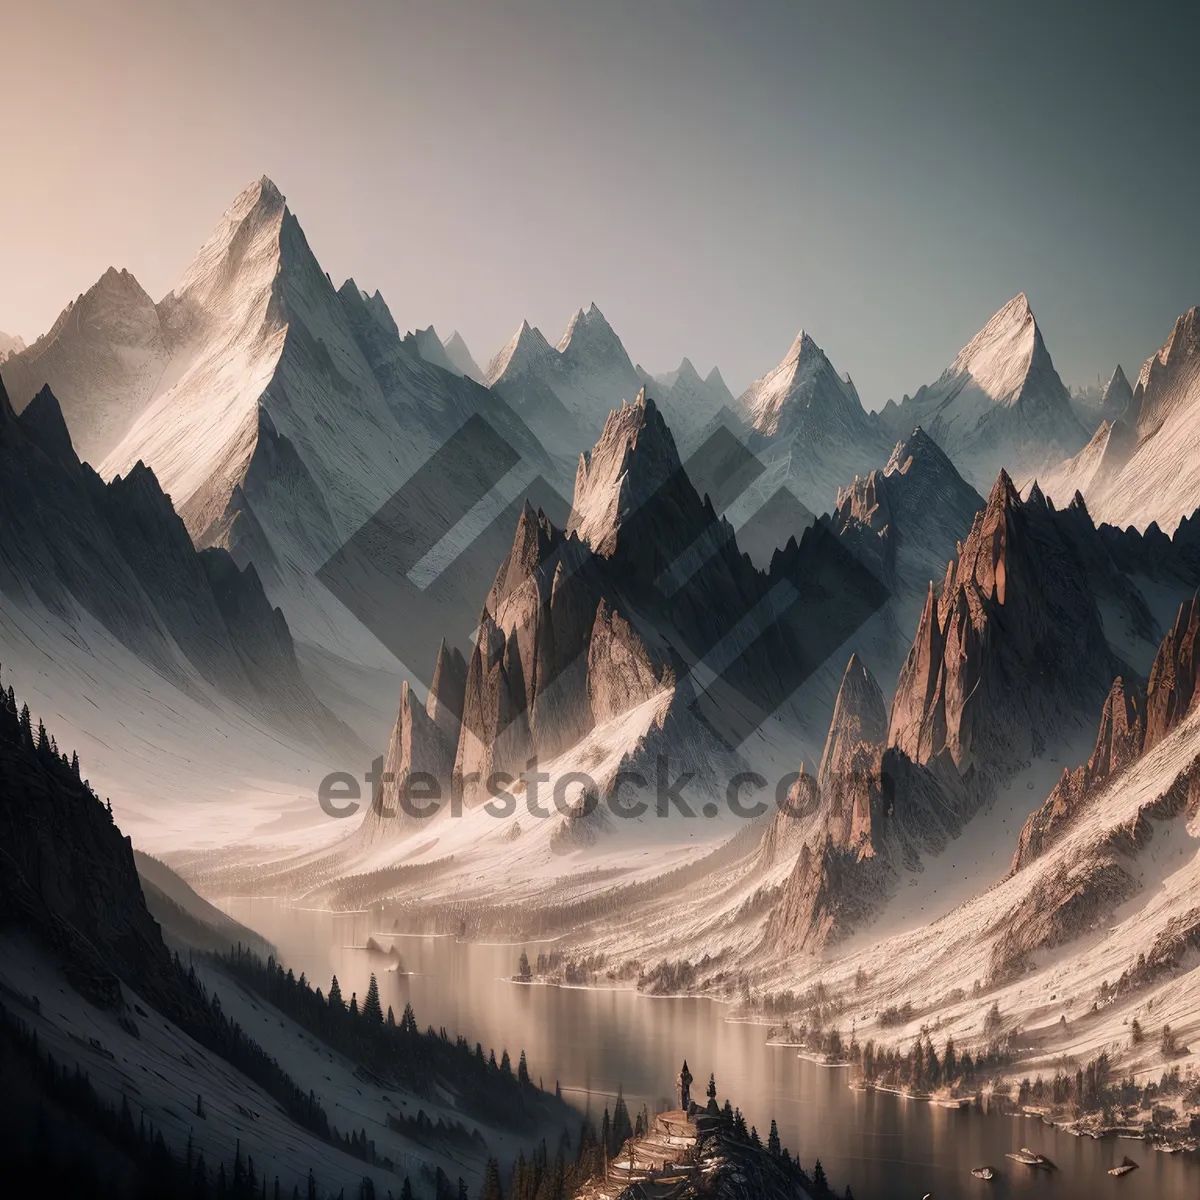 Picture of Snow-capped peaks in an Alpine wonderland.